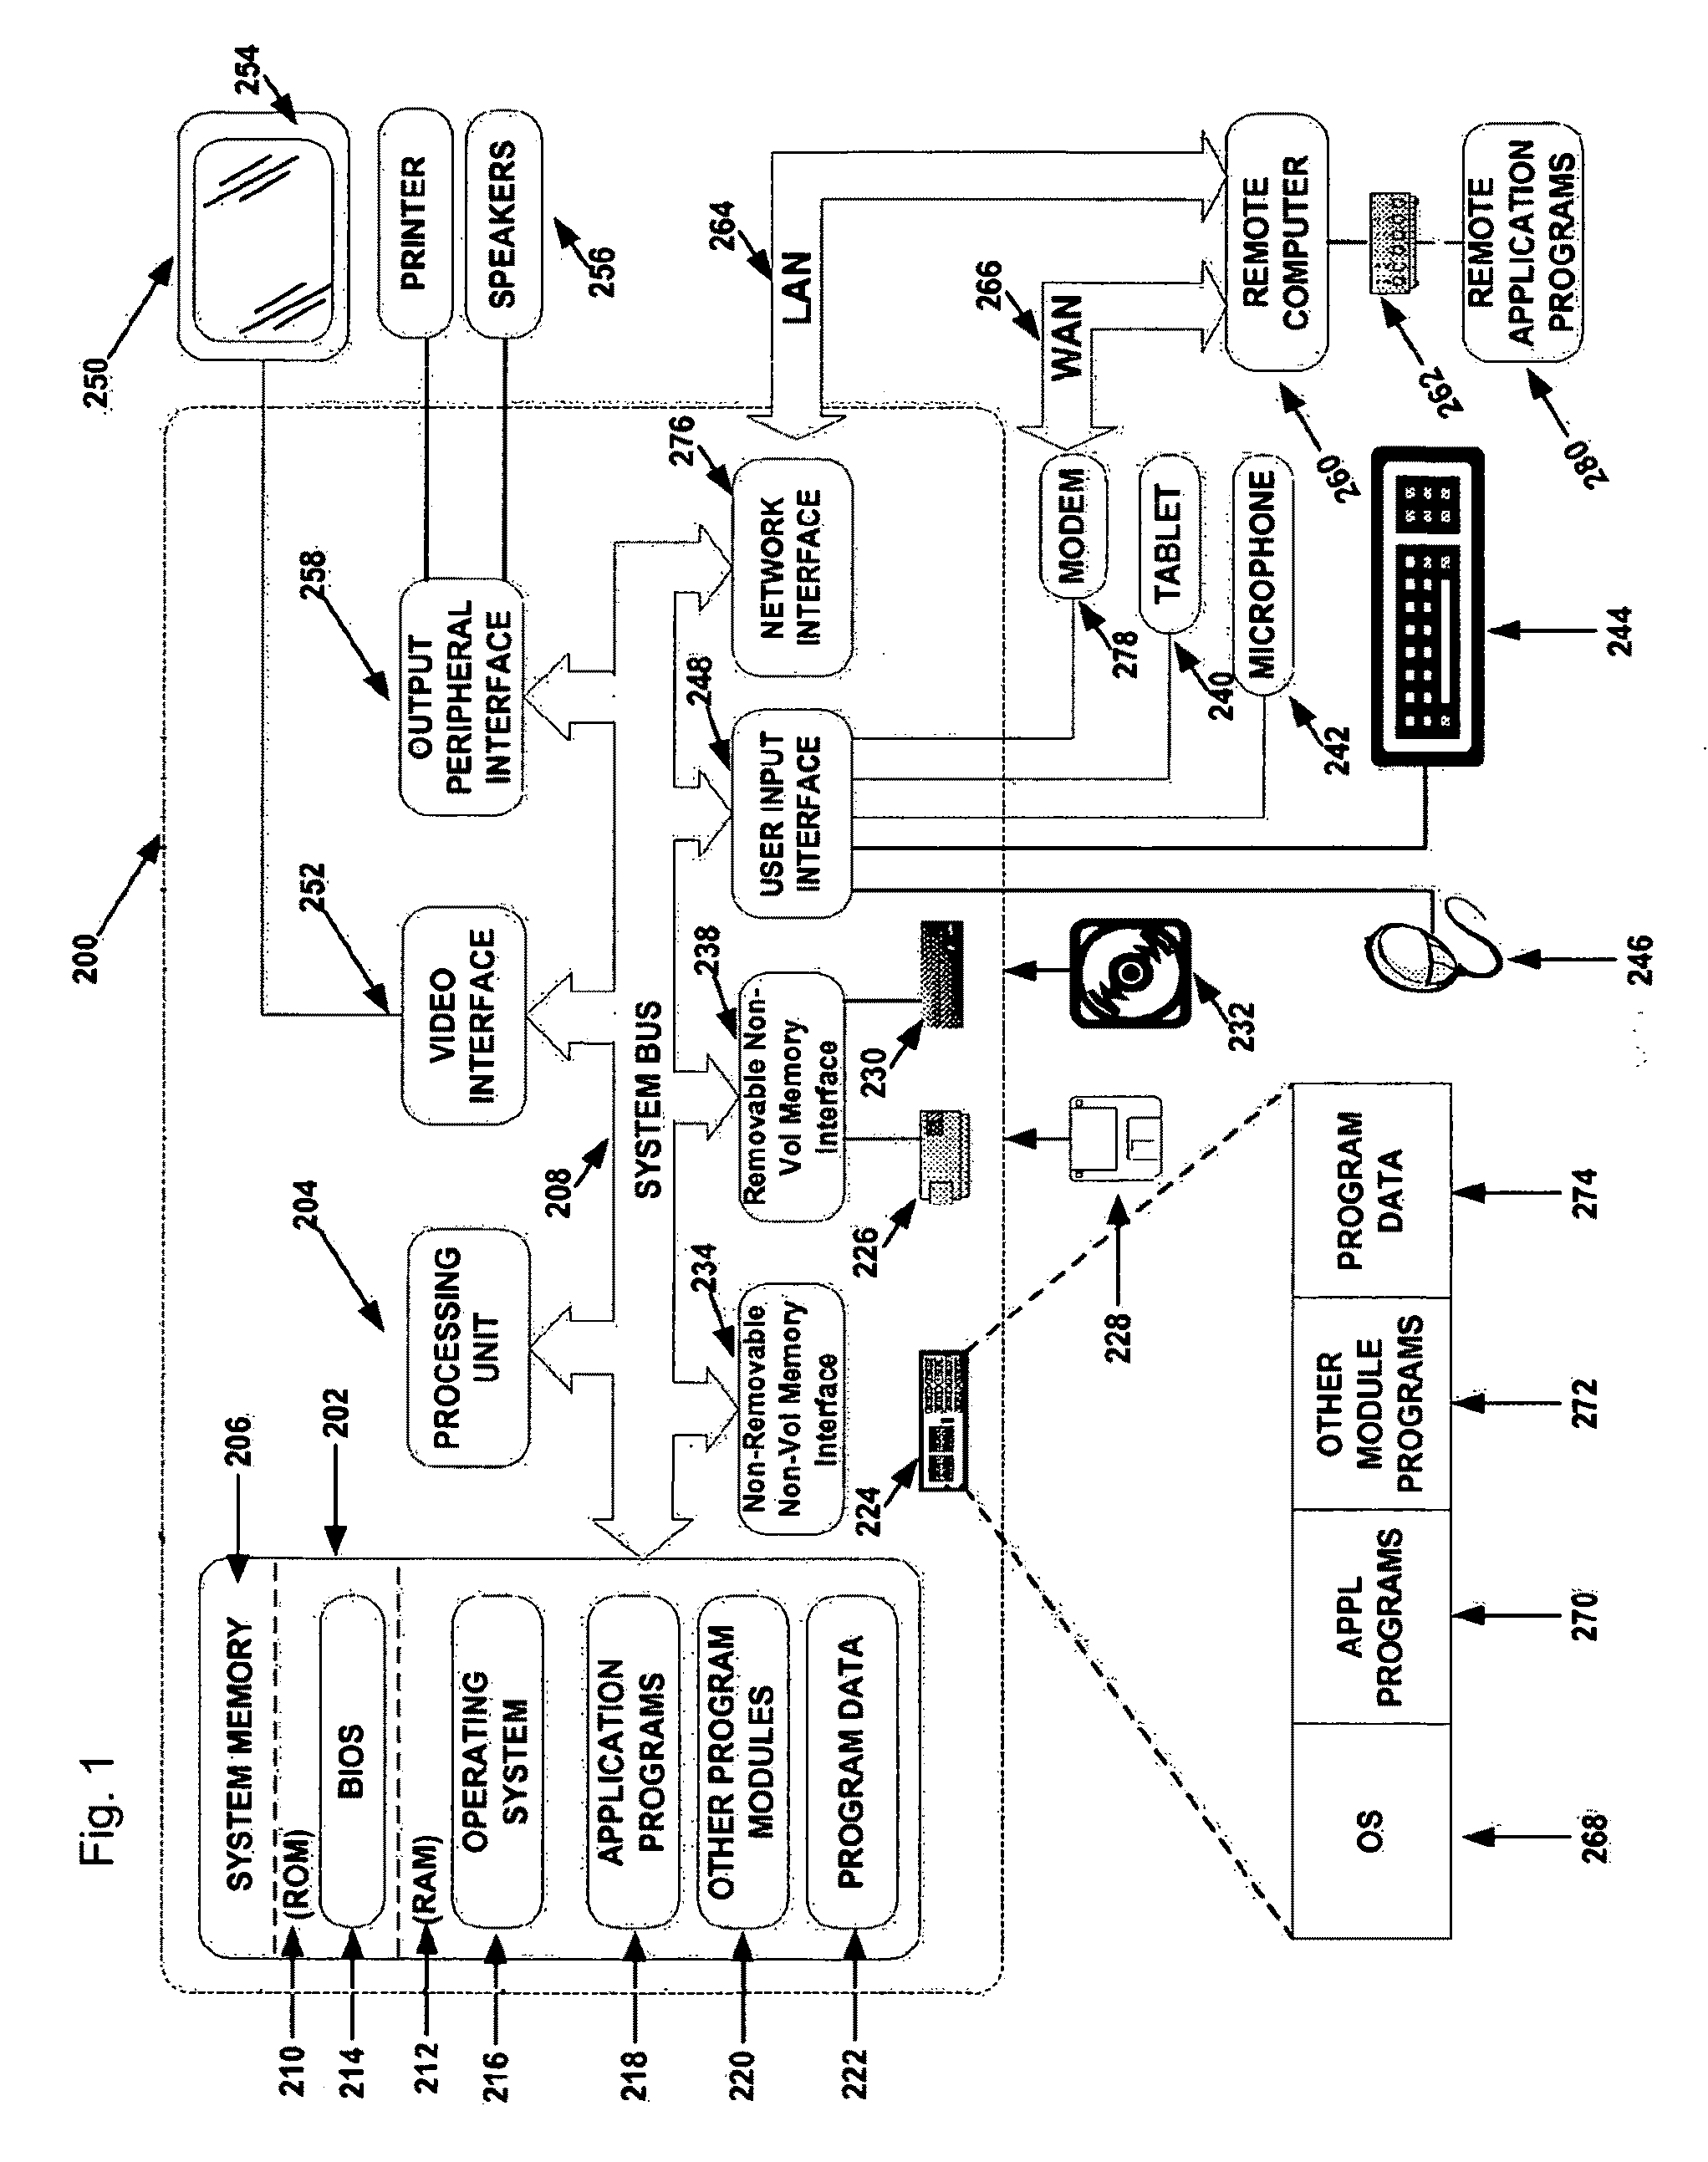 Interchangeable instrument panel overlay system for a flight simulator